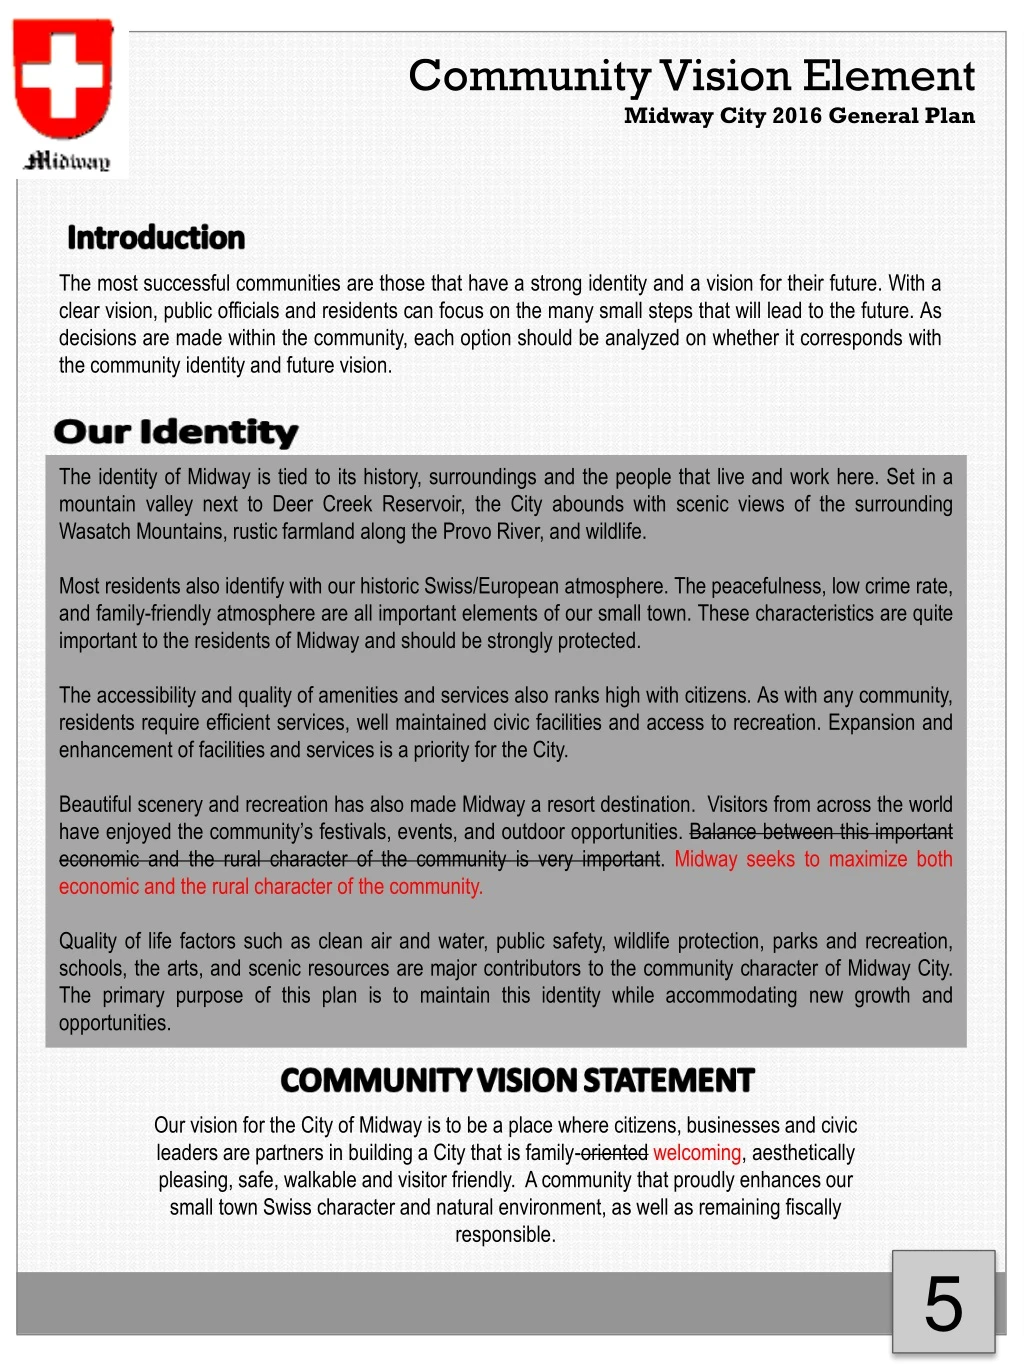 community vision element midway city 2016 general